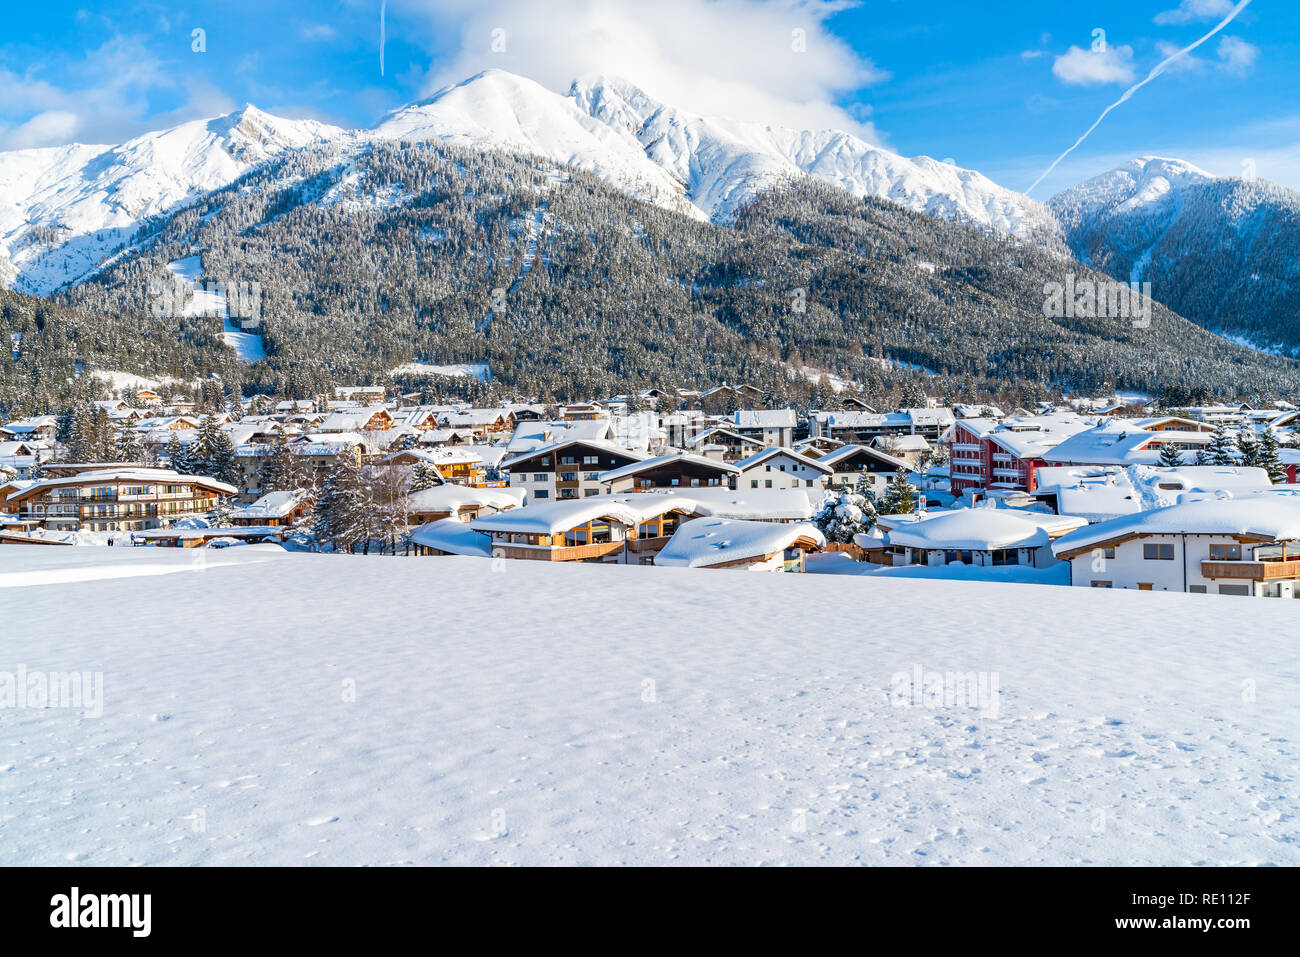 SEEFELD, AUSTRIA - JANUARY 12, 2019: Seefeld in Tirol located about 17 km from Innsbruck is one of  the most popular tourist resorts in Austria well k Stock Photo